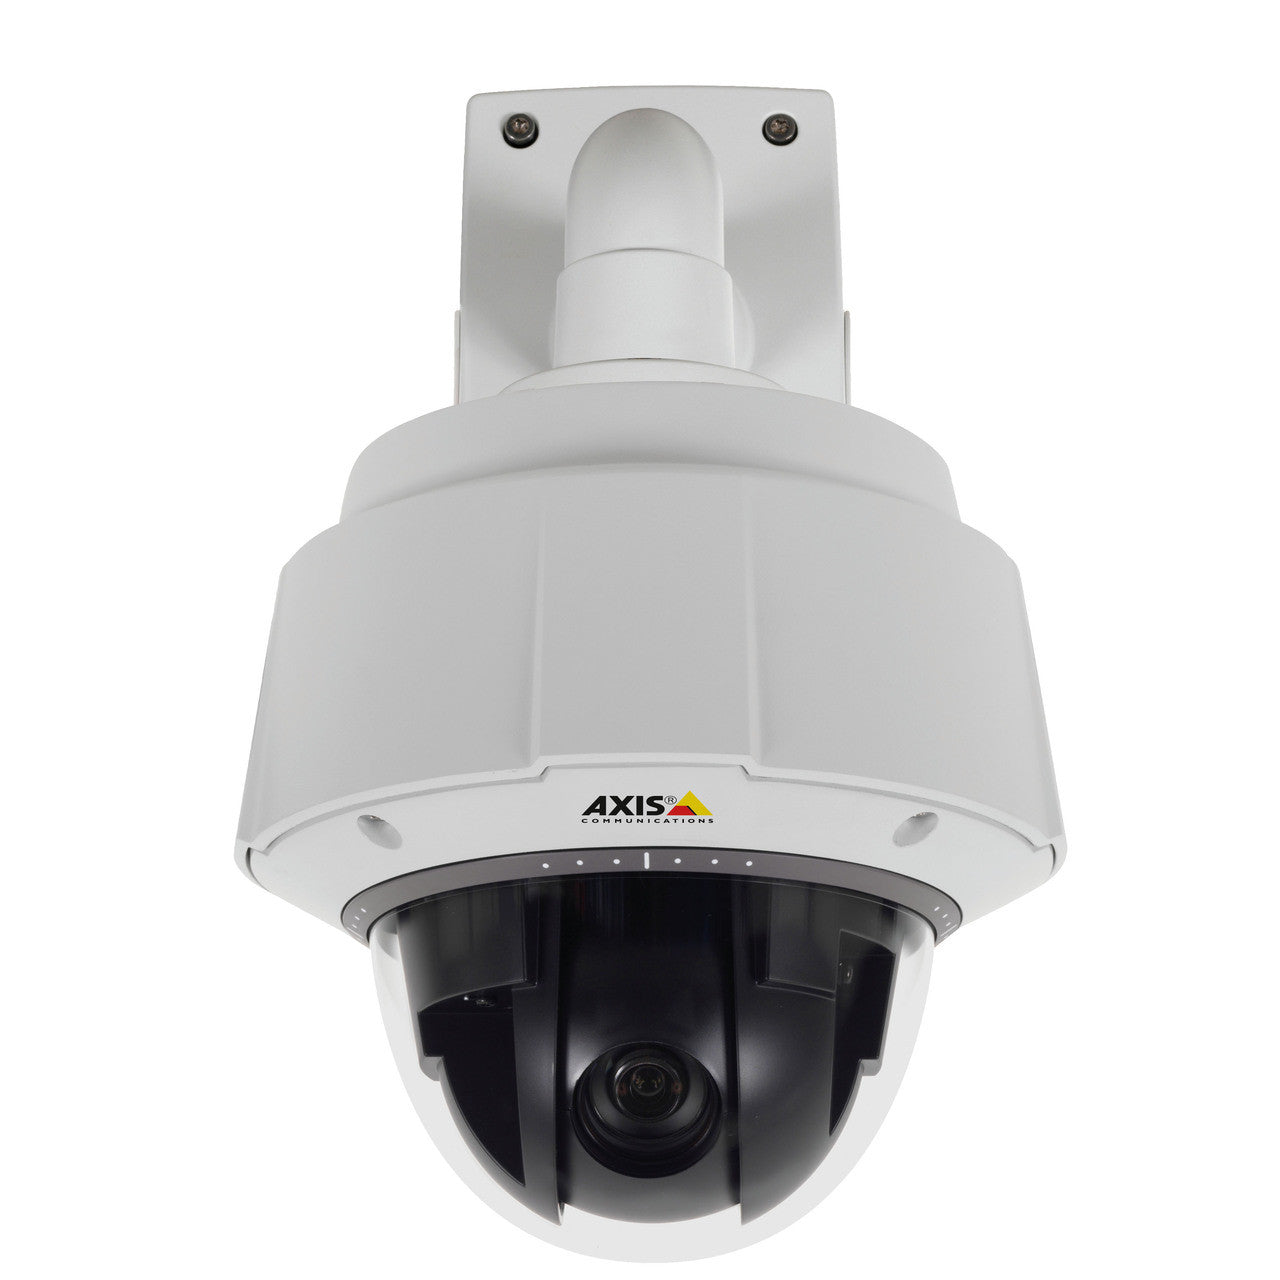 AXIS Q6042-E with T91A61 Wall Mount (not included)